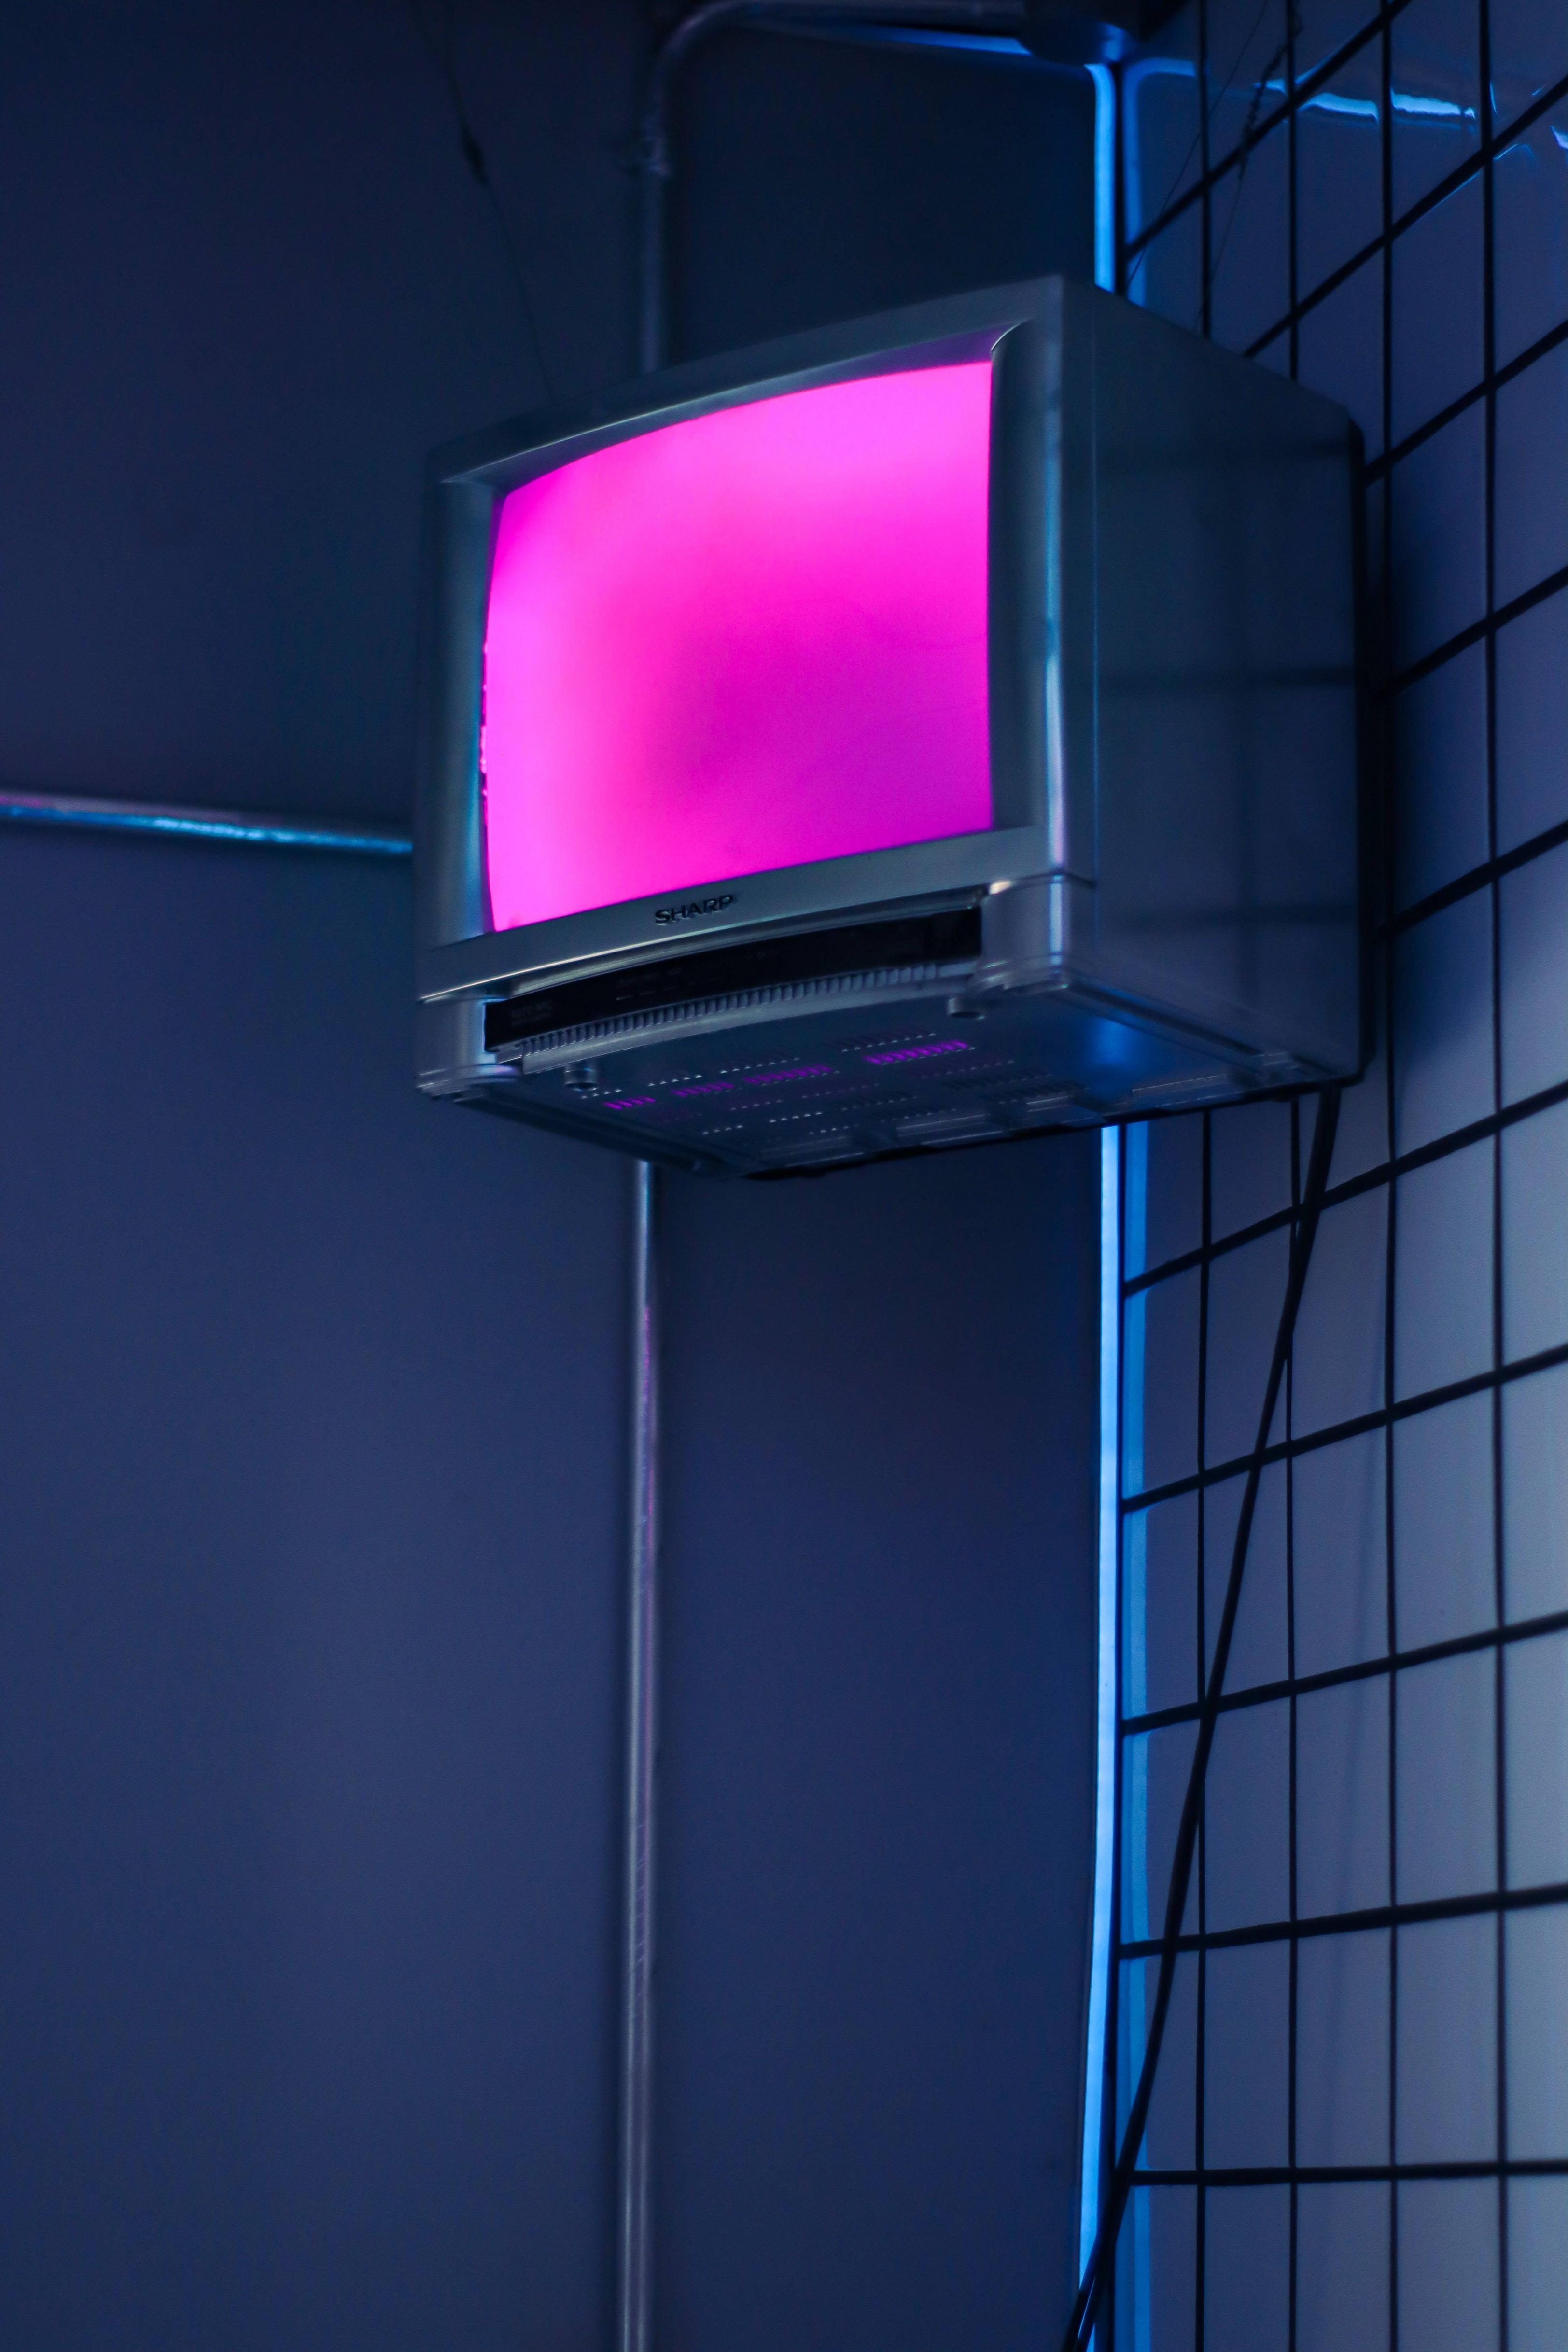 A television set with a pink screen is hanging on a wall. - Dark blue